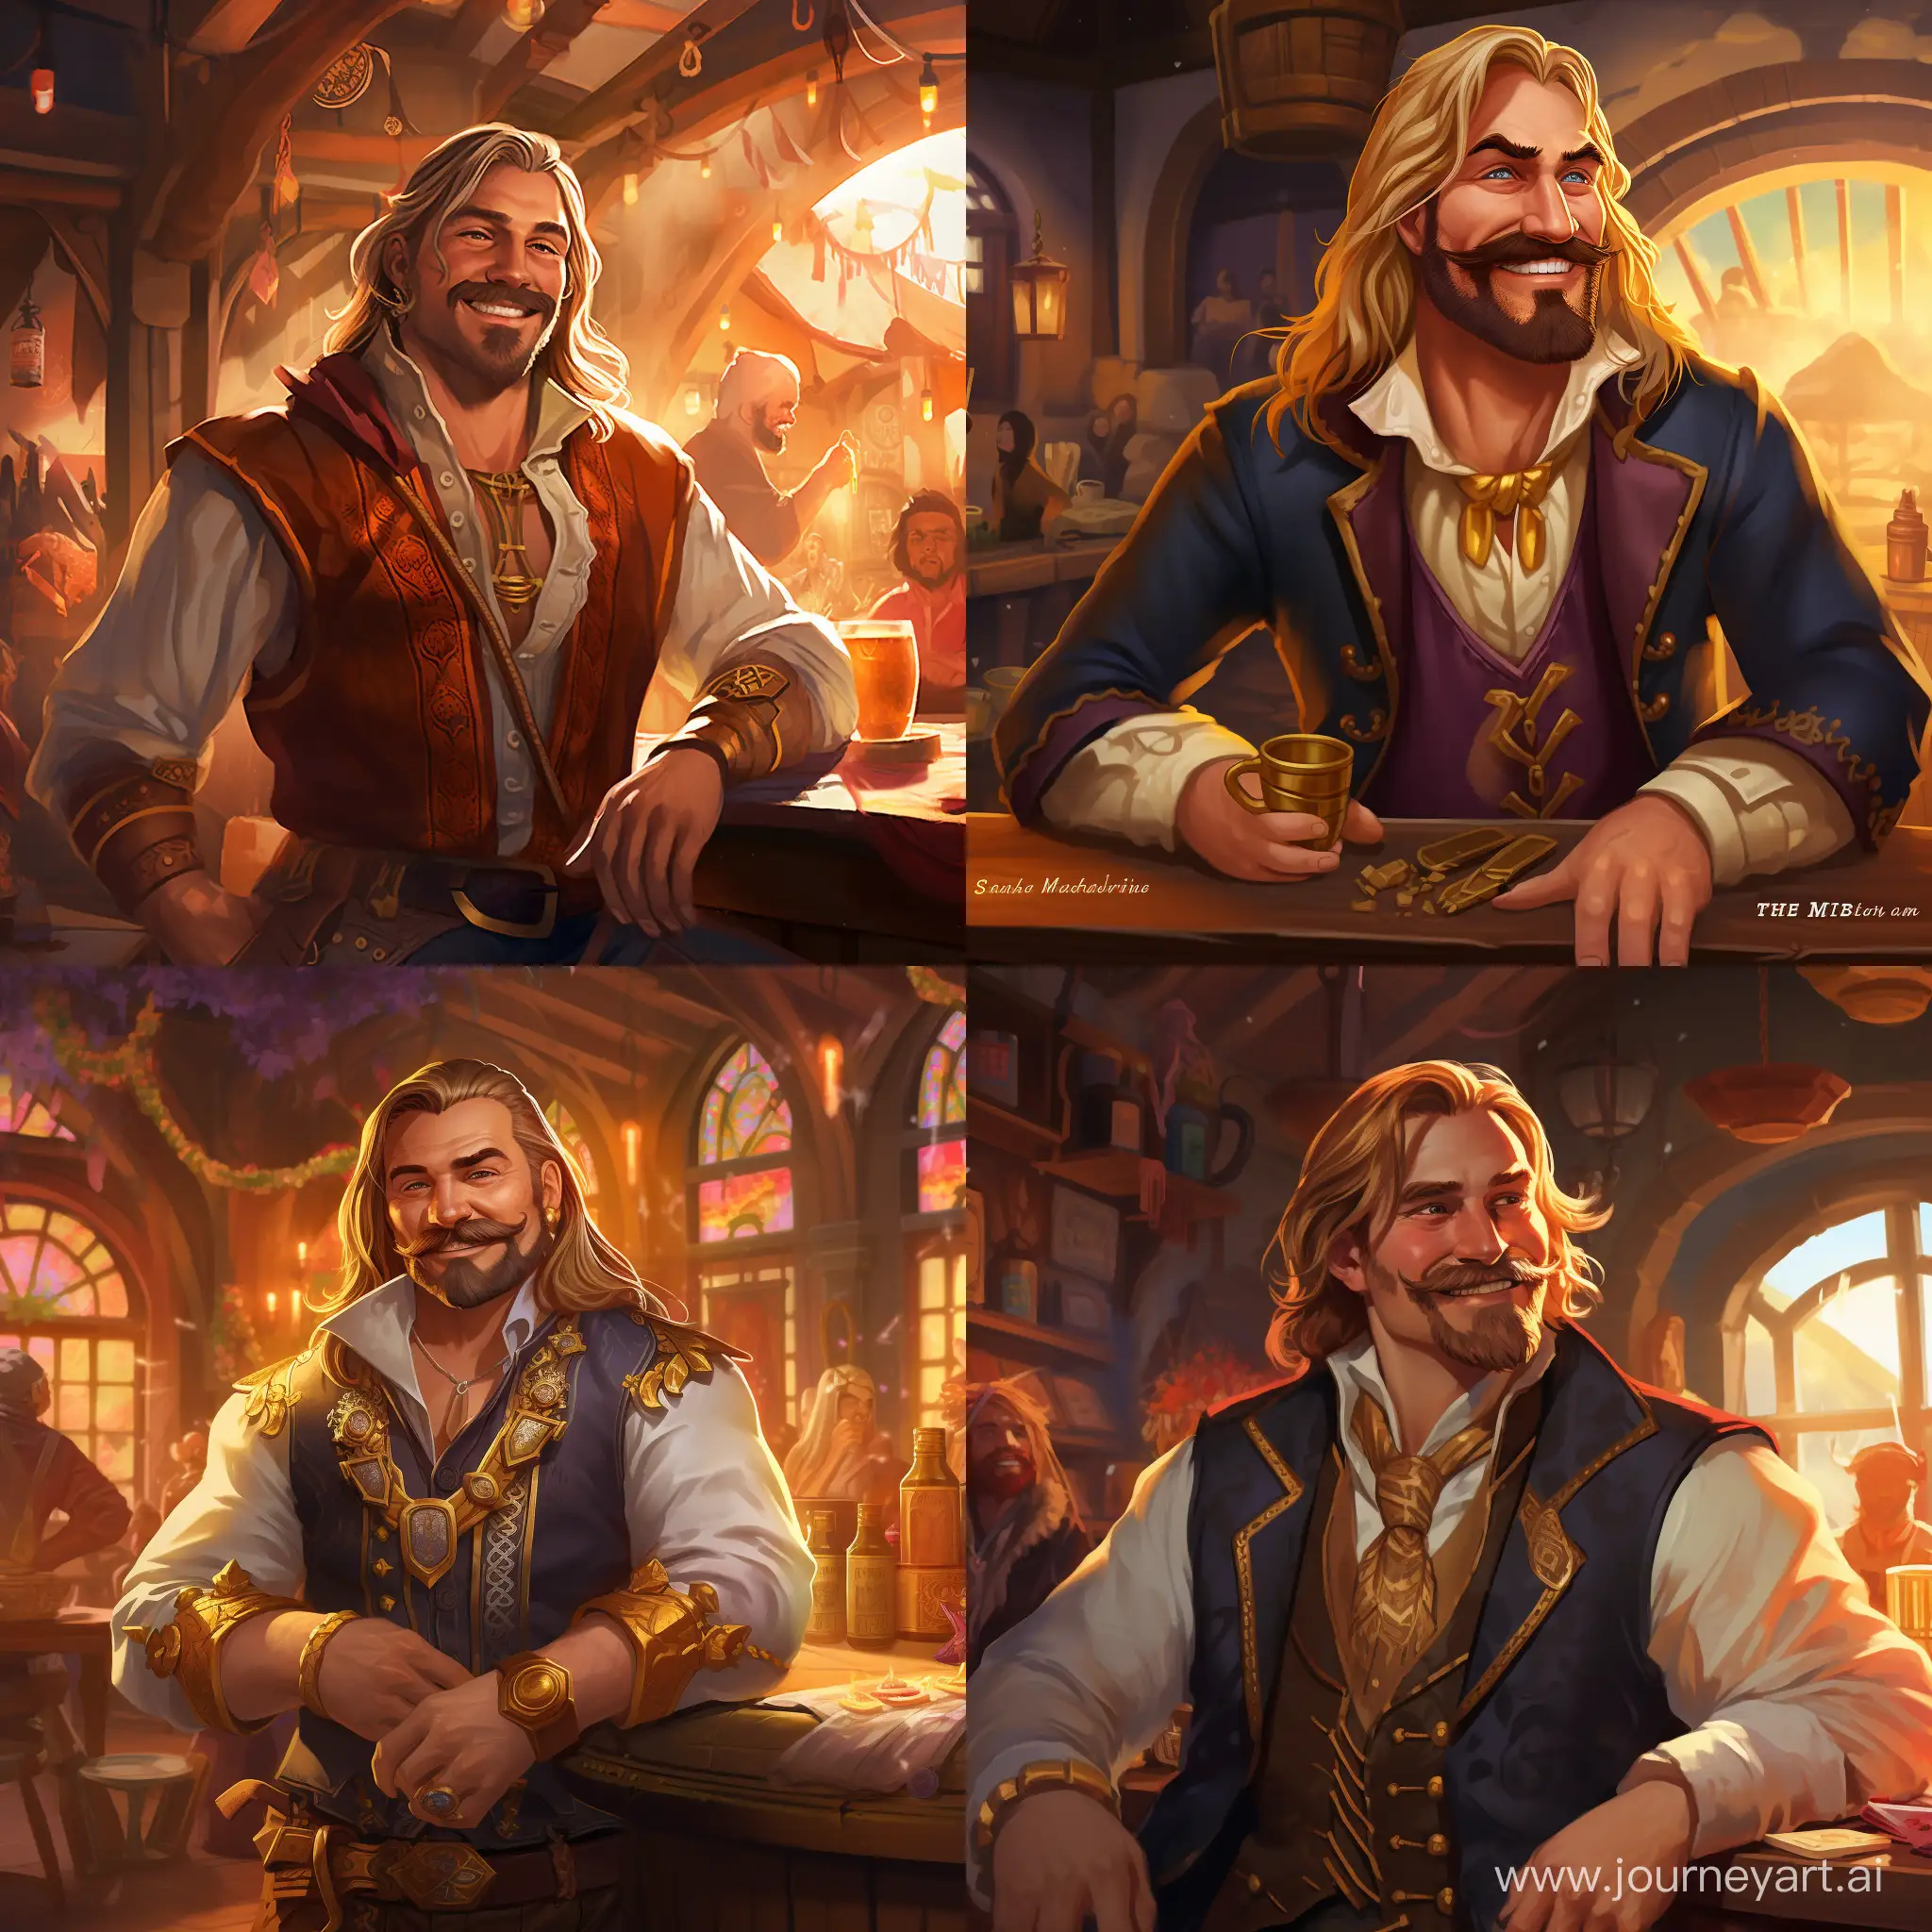 Draw me a concept art of a Viking trader who has long blond hair and a long beard with a mustache. 
He is 35 years old and looks young. He is dressed in expensive clothes and wears gold rings with stones. Smiling. In the background there is a tavern where people are having fun